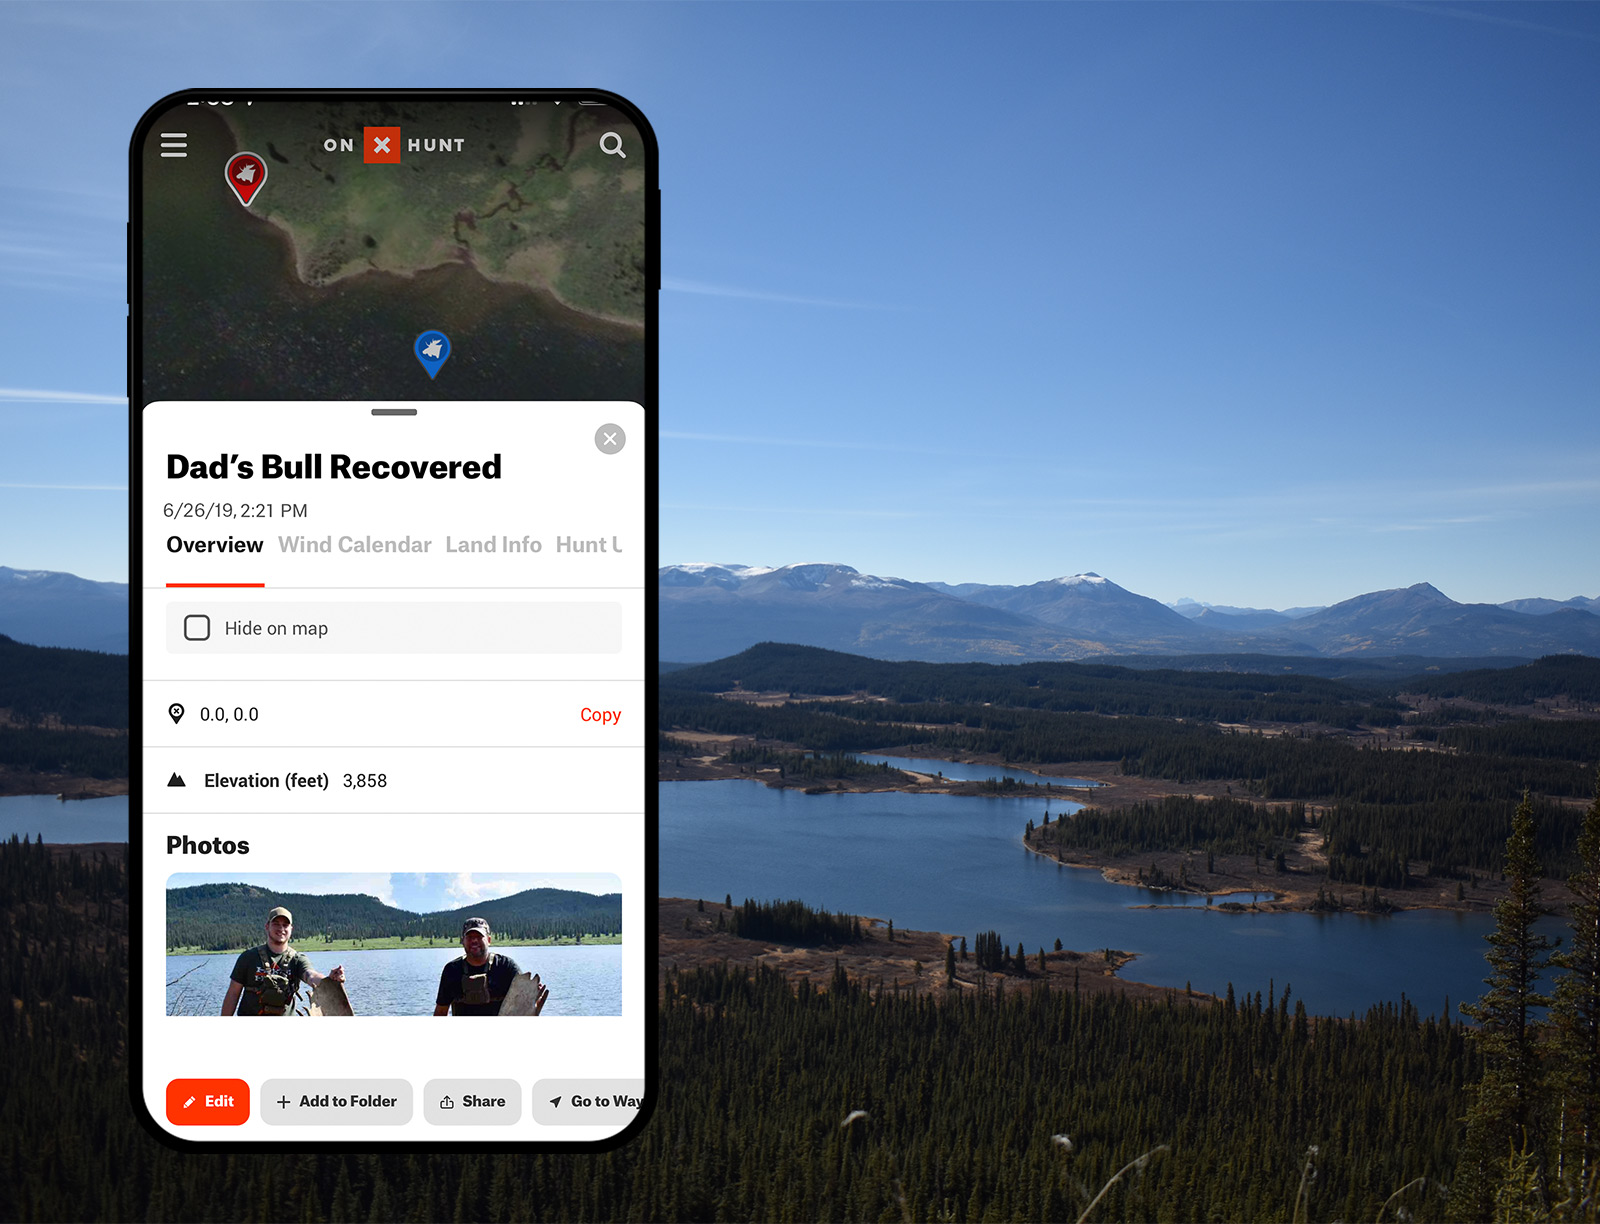 onX Hunt App used to recover a moose hunt in Alaska.